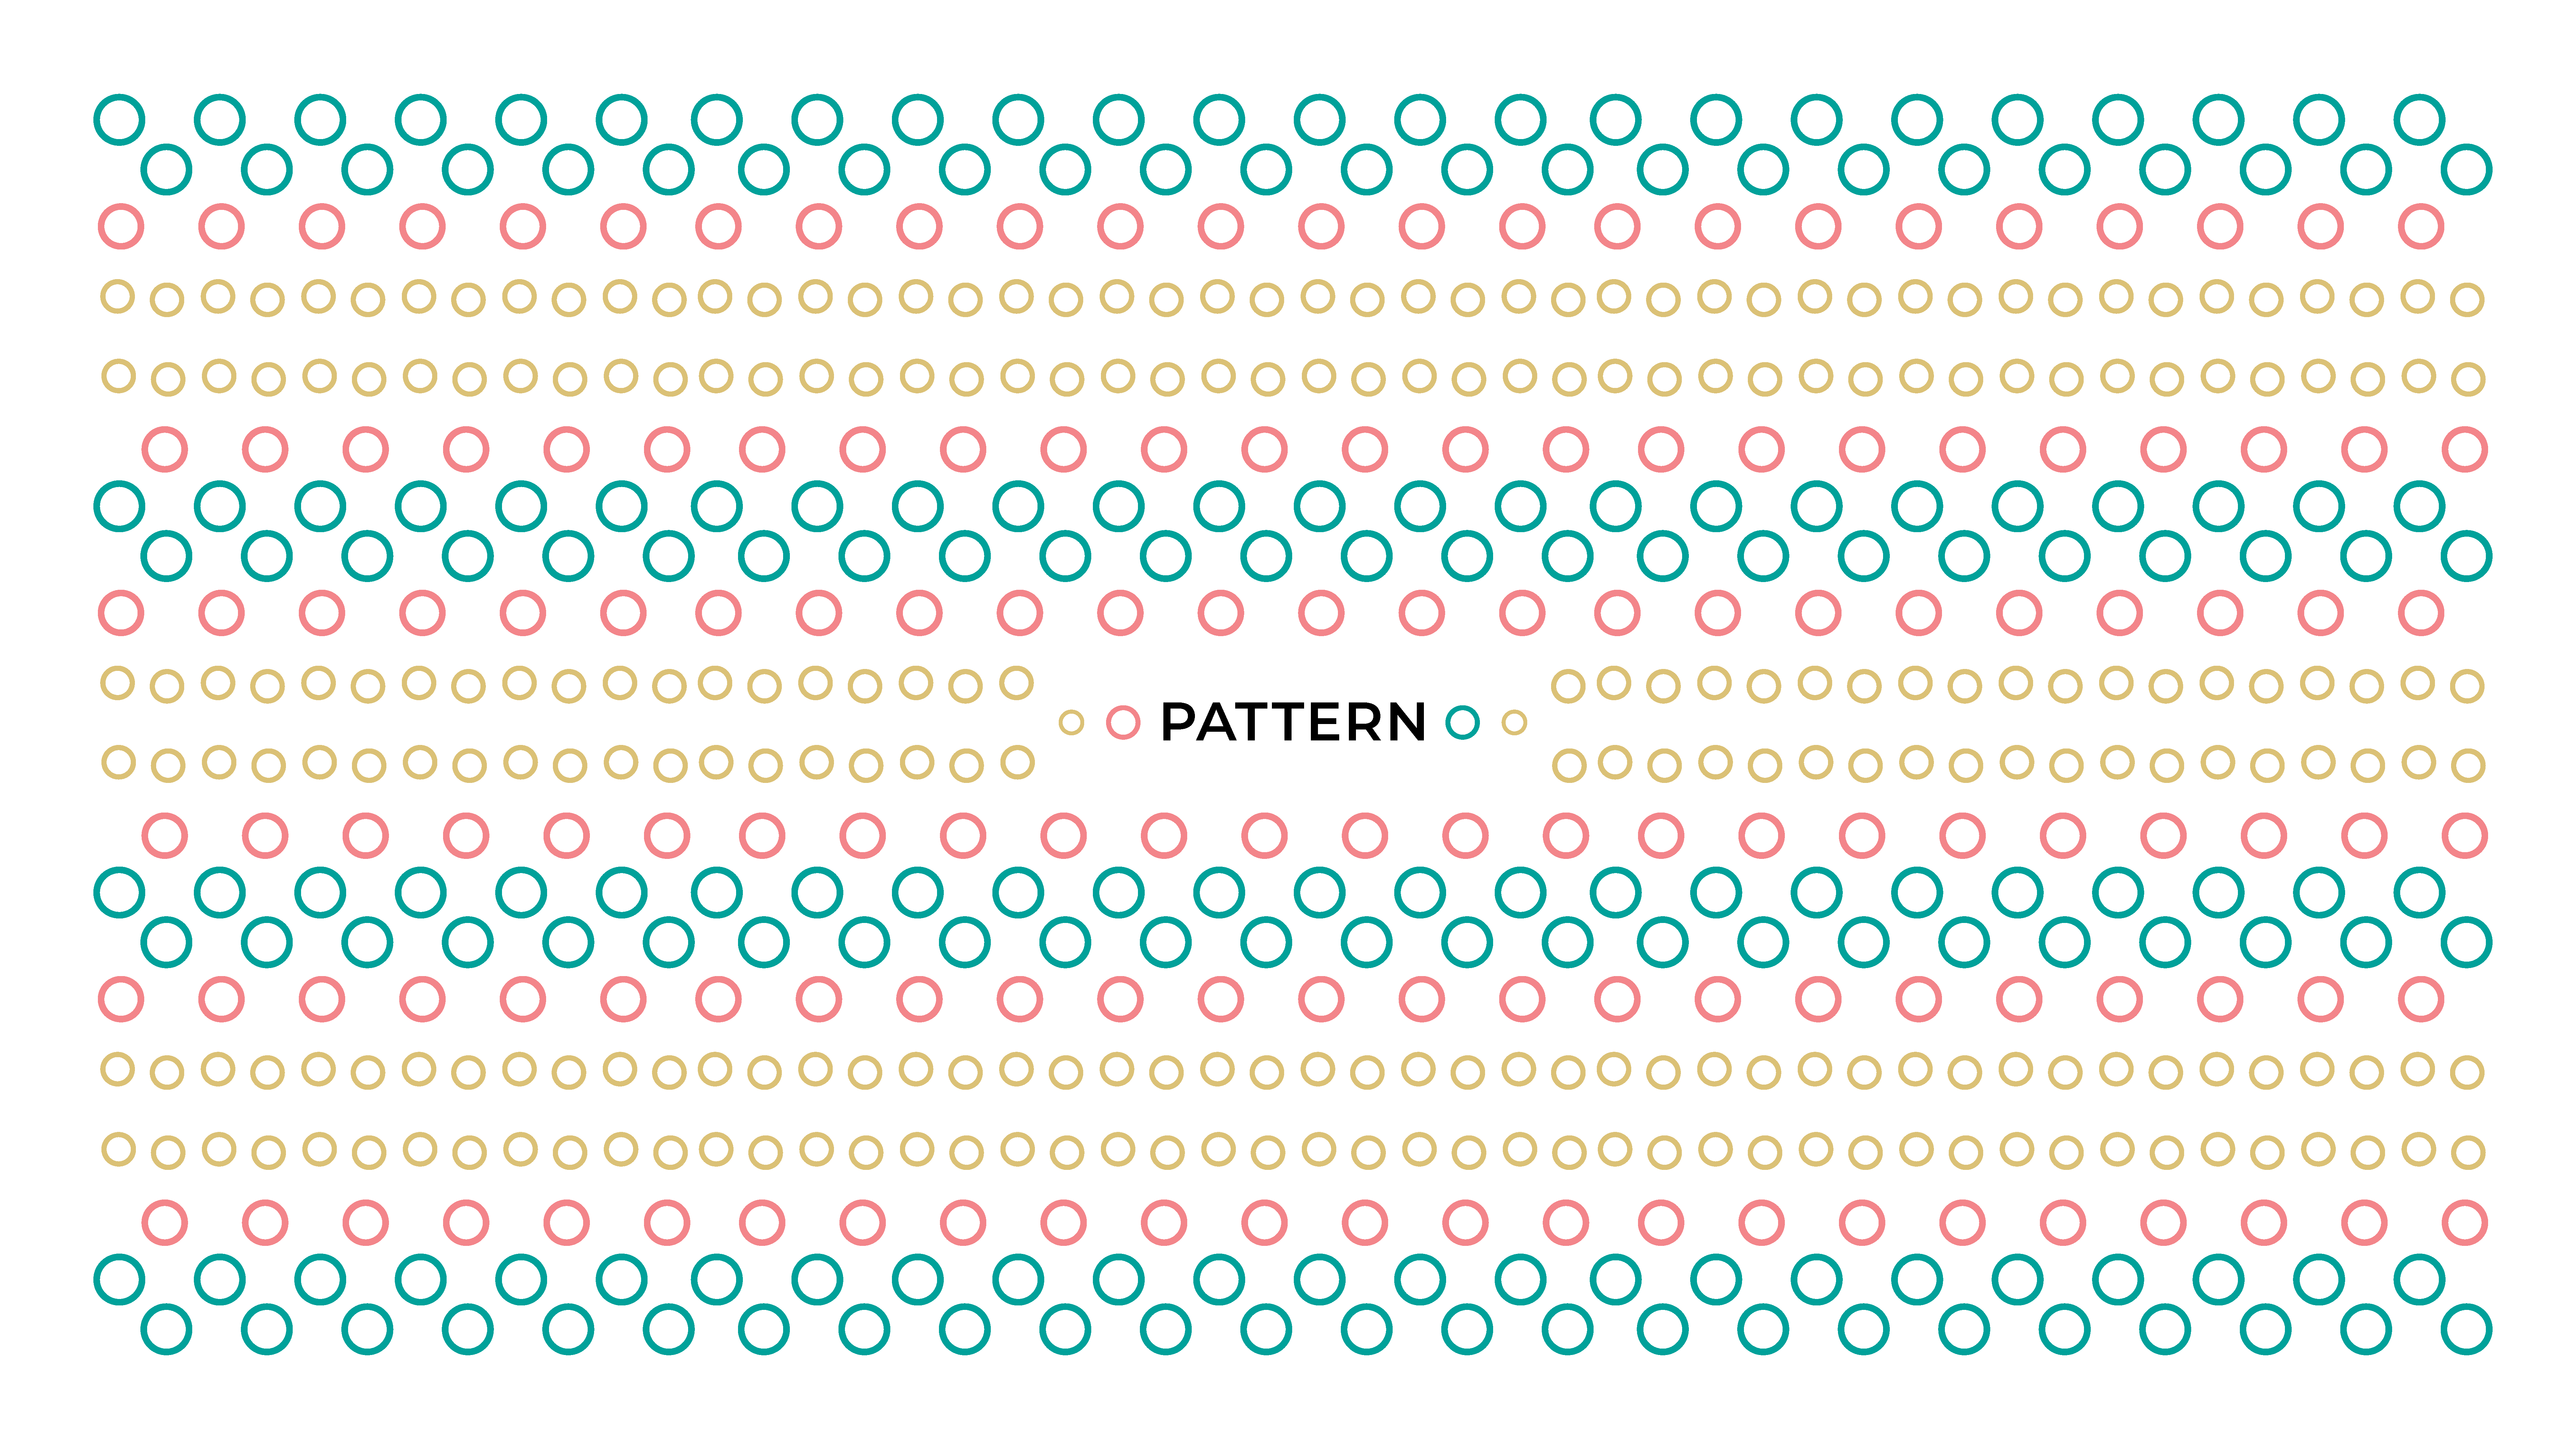 BE WELL PATTERN